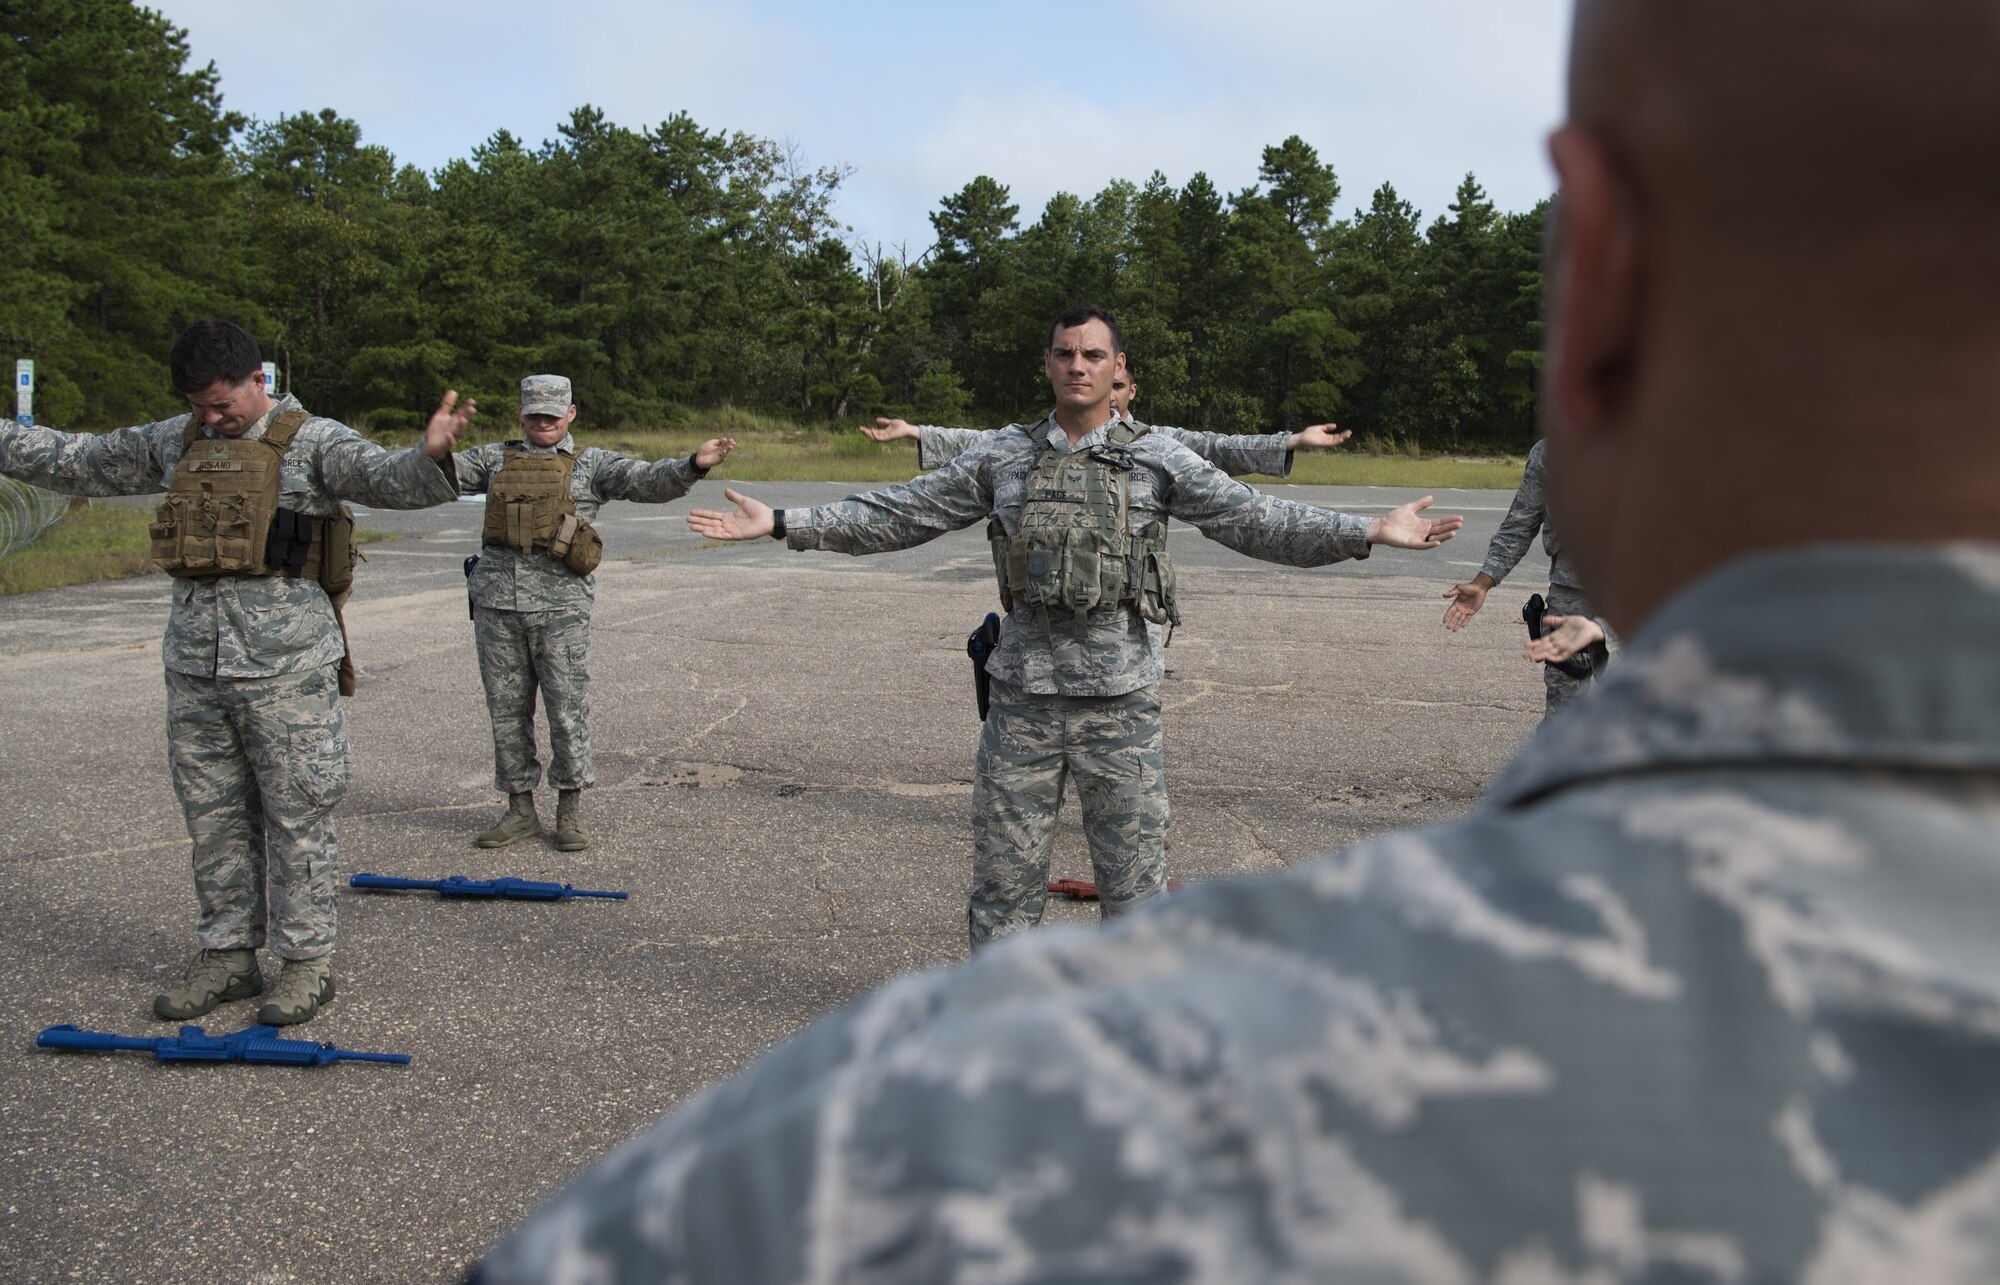 The Air Mobility Command team exercises on Joint Base McGuire-Dix-Lakehurst, New Jersey, Sept. 5, 2018. The team trained for three weeks together before the 2018 Air Force Defender Challenge. The challenge is a worldwide Air Force competition that pits security forces teams against each other in weapons scenarios, dismounted operations and combat endurance tests.(U.S. Air force photo by Airman Ariel Owings)